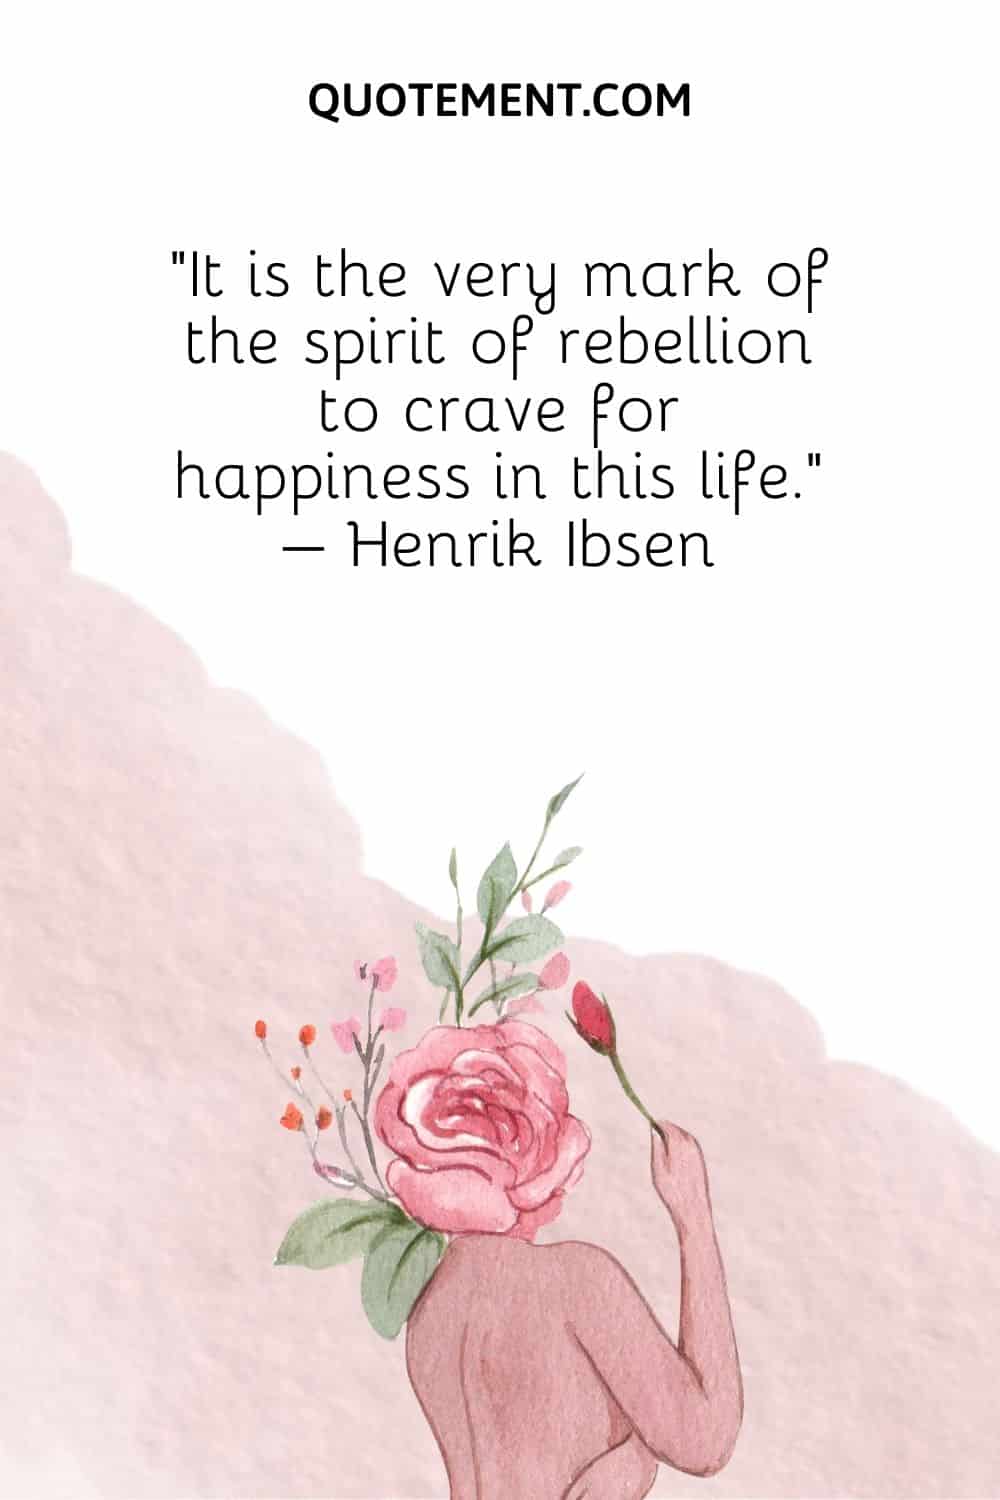 It is the very mark of the spirit of rebellion to crave for happiness in this life. – Henrik Ibsen